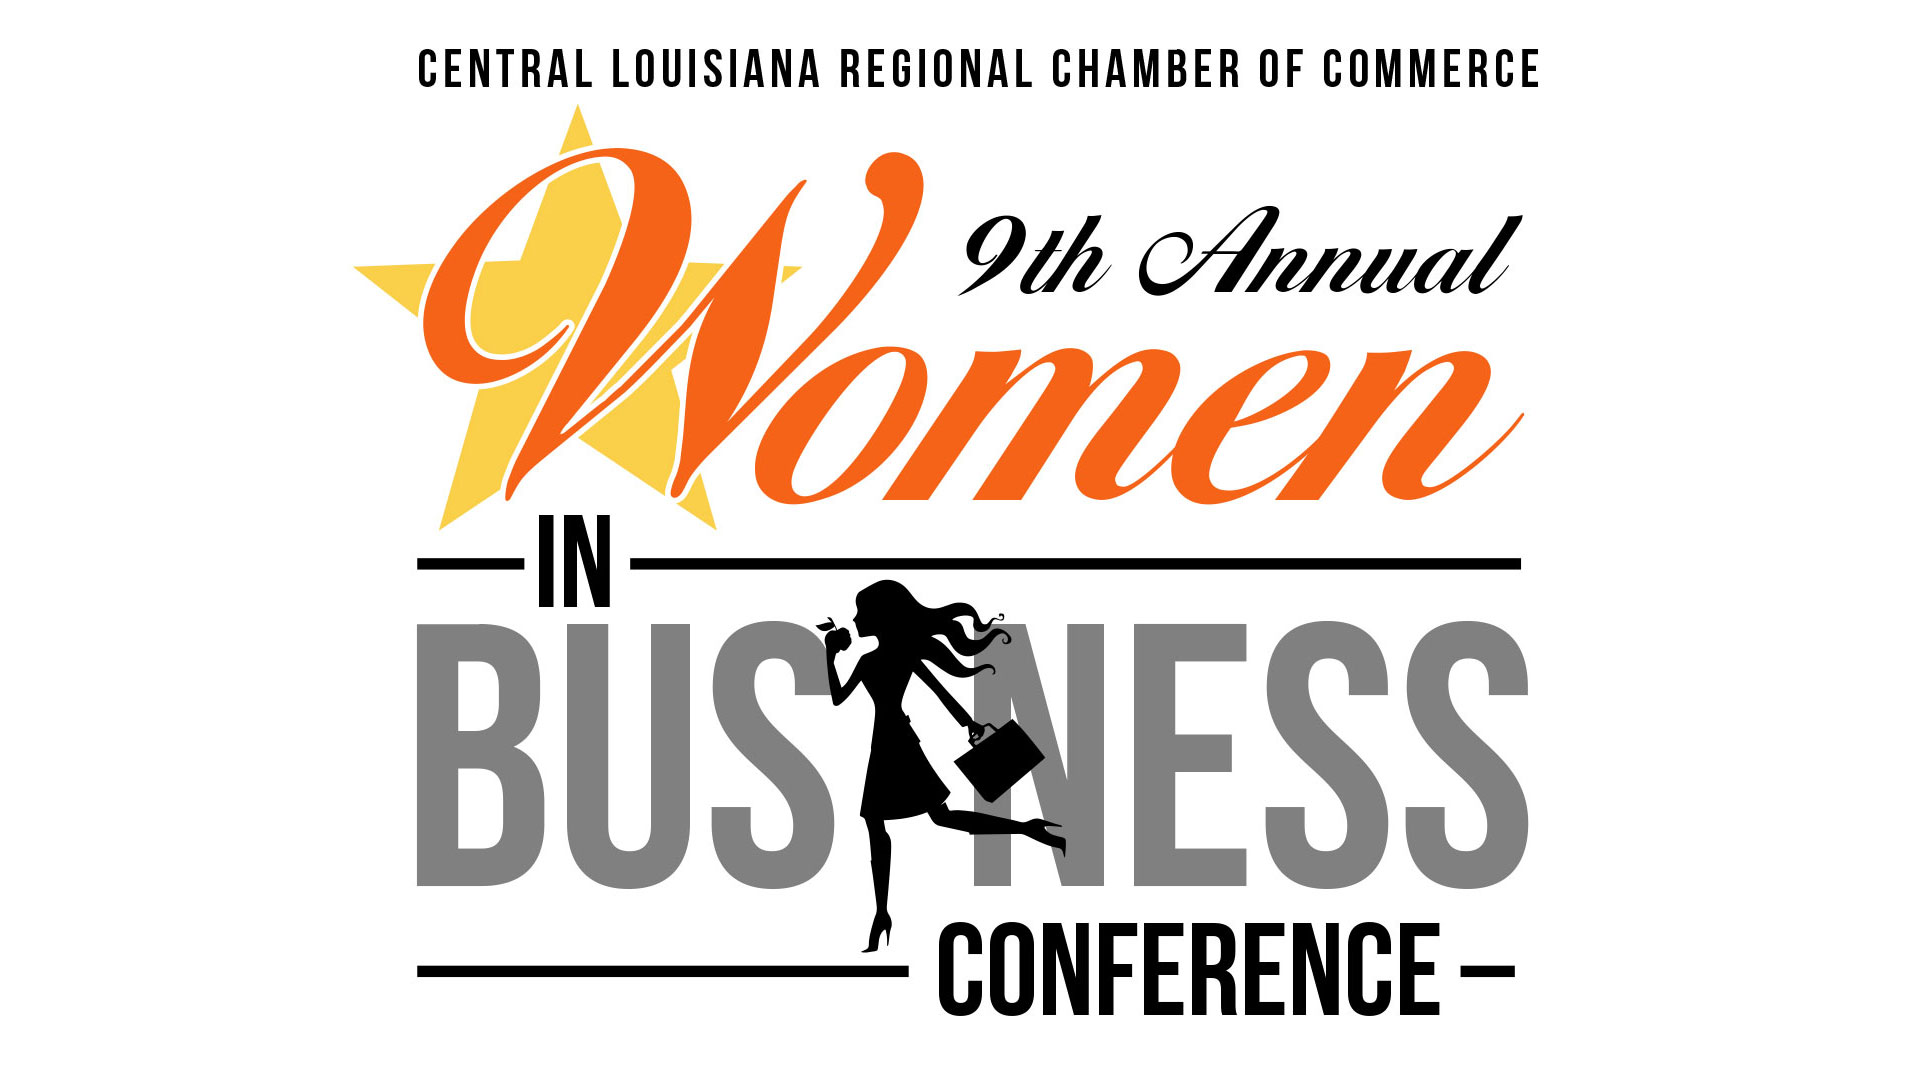 Women in Business Conference